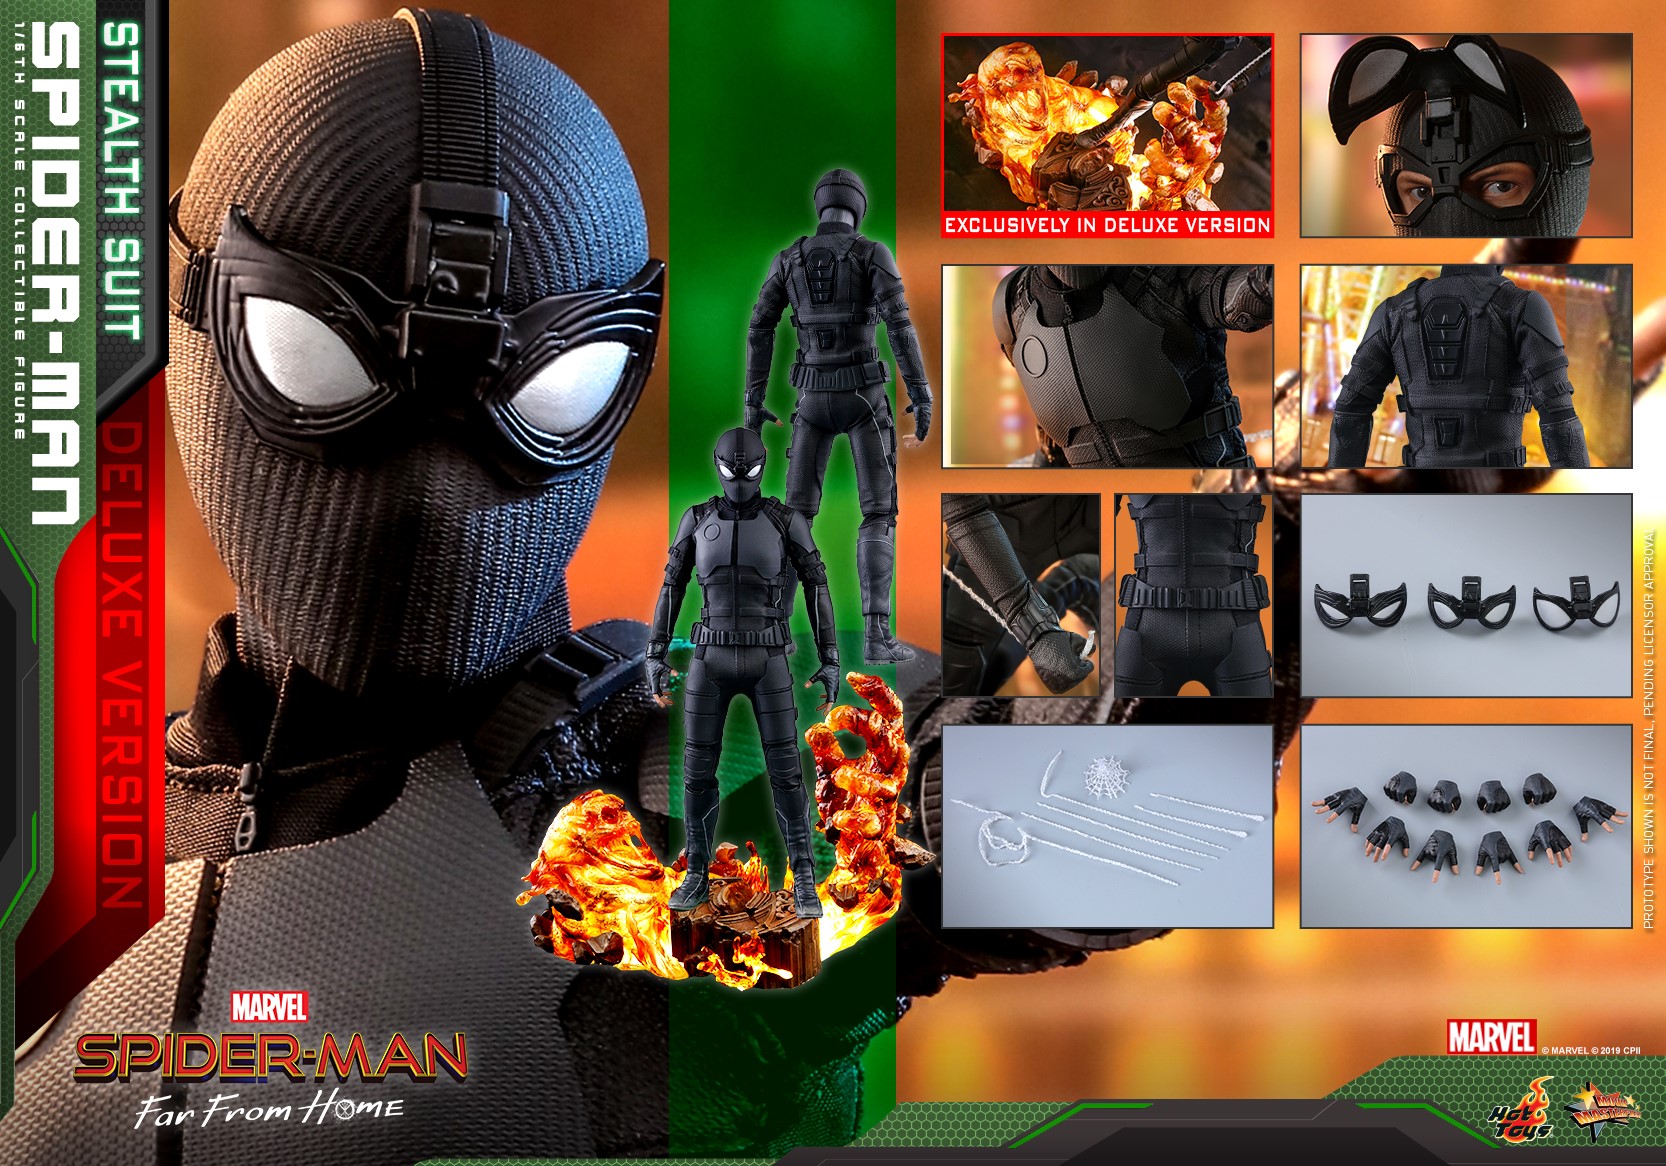 Hot-Toys-Stealth-Suit-Spider-Man-Deluxe-022.jpg